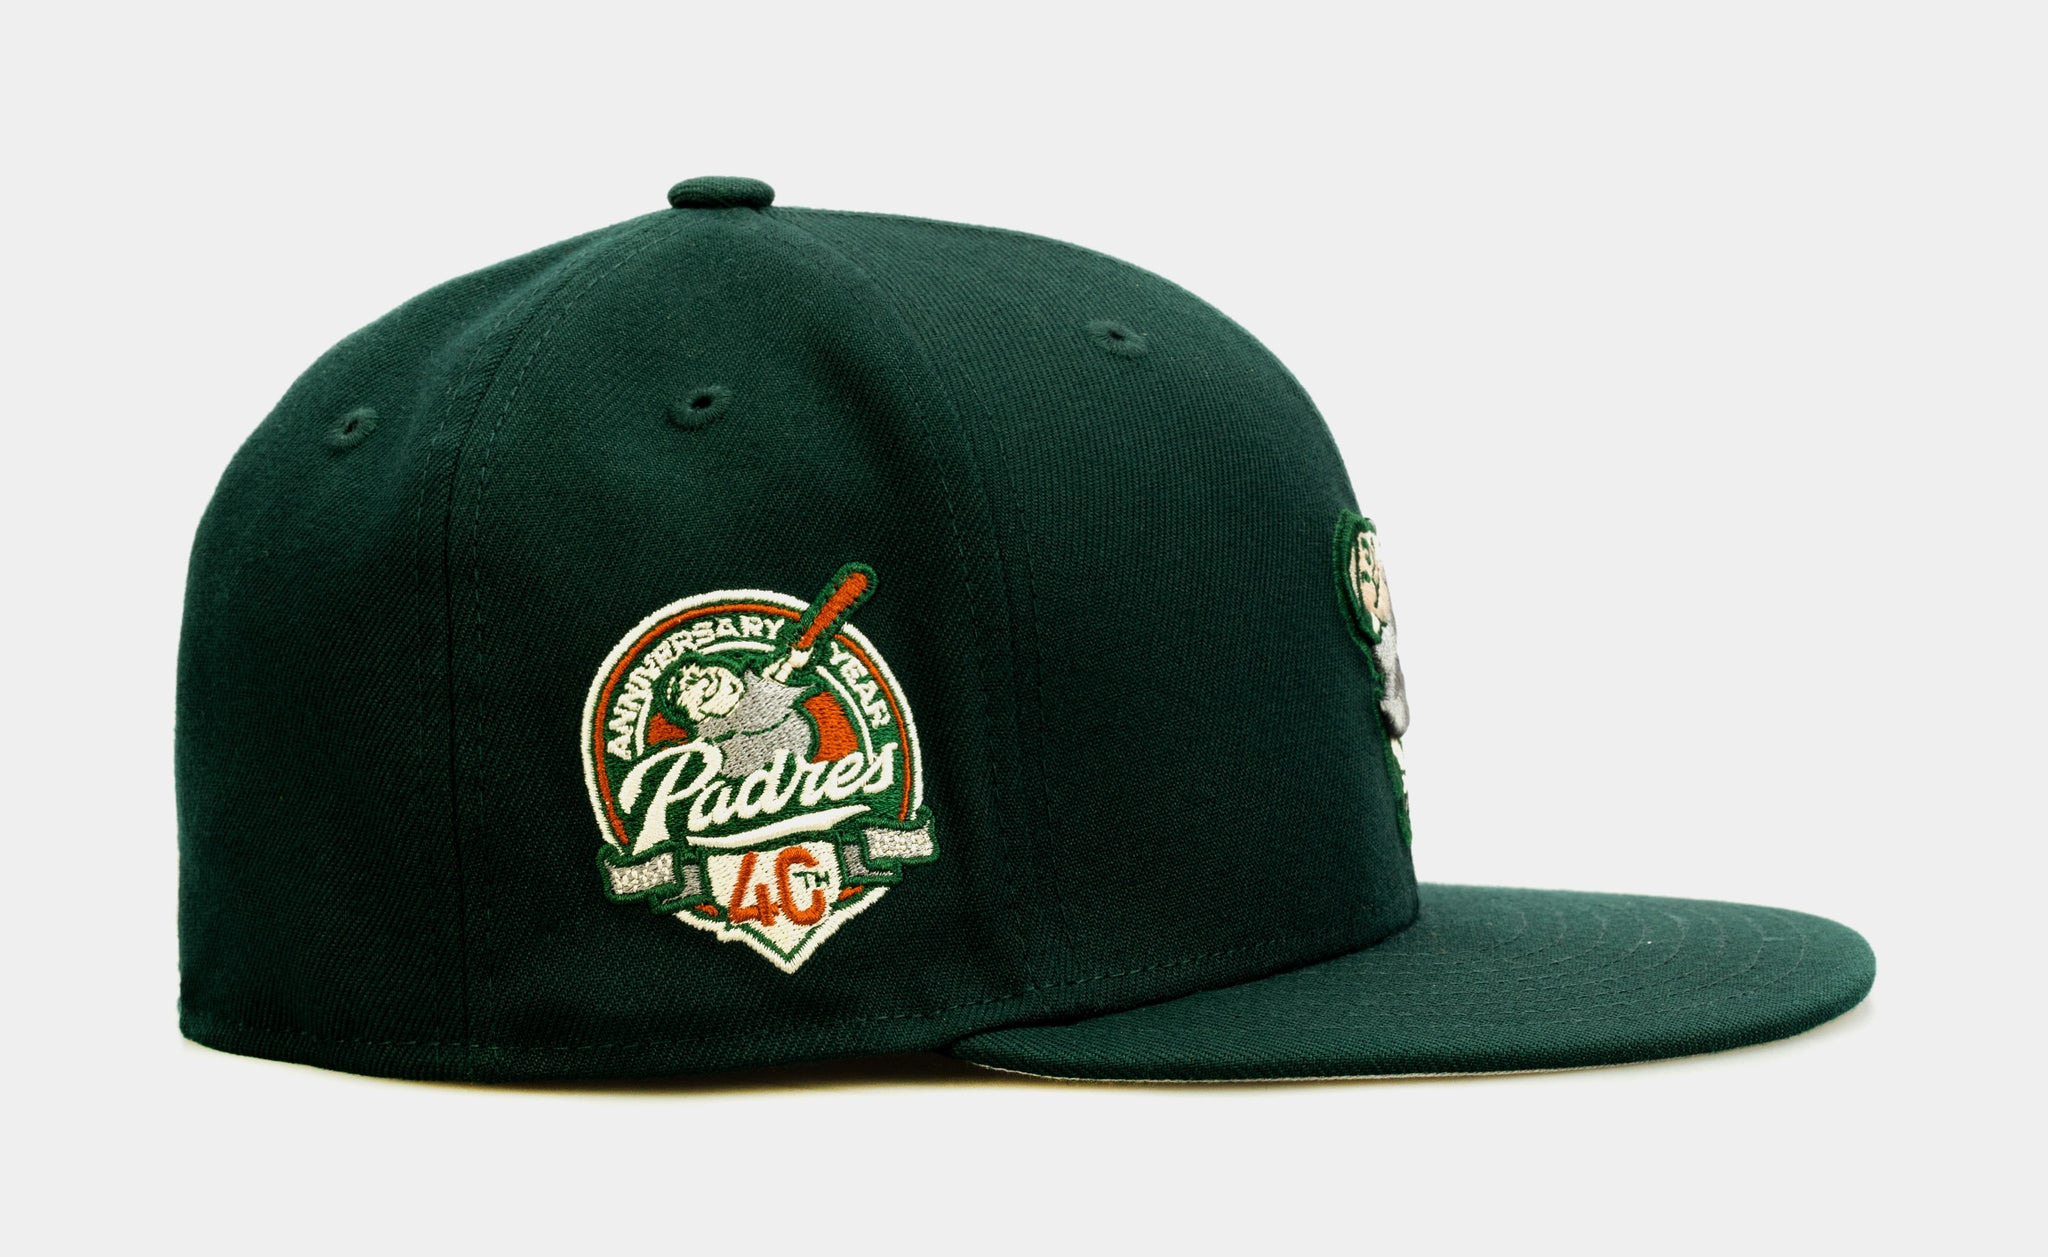 New York Yankees New Era St. Patrick's Day 59FIFTY Fitted Hat - Green 7 1/8